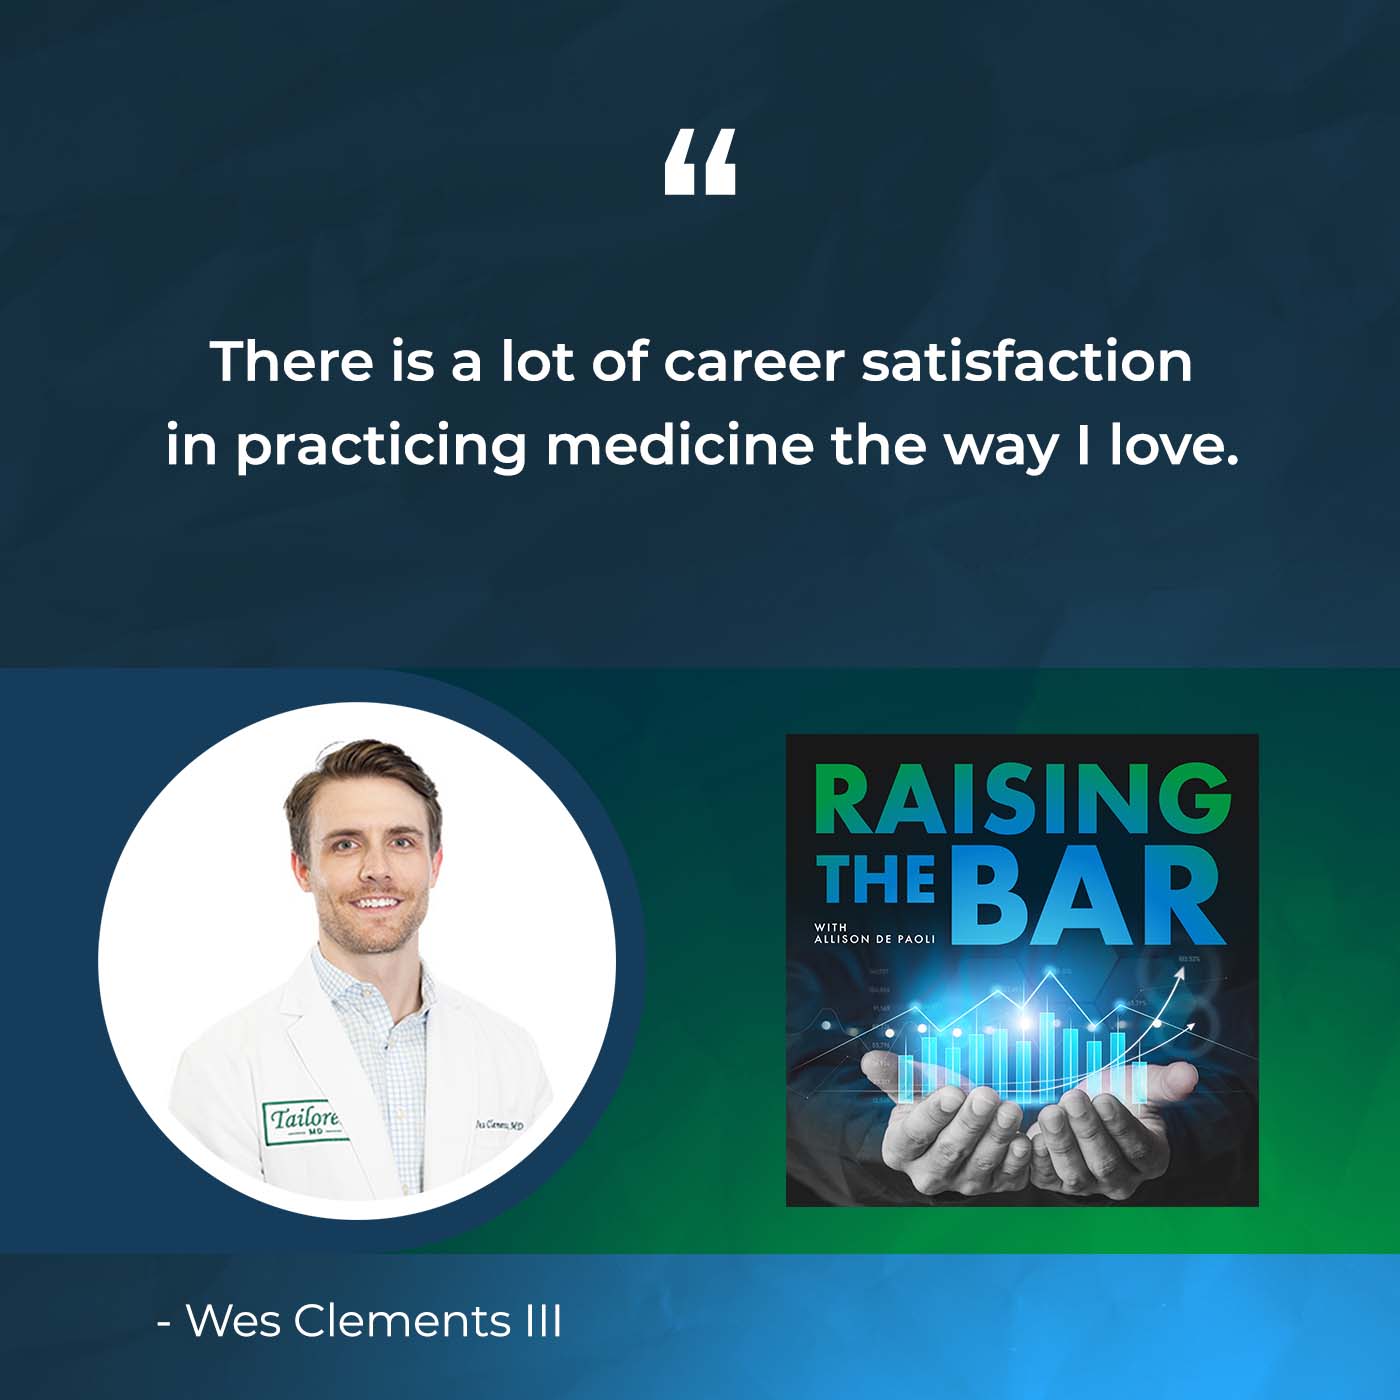 RTB - DFY Wes Clements III | Direct Primary Care